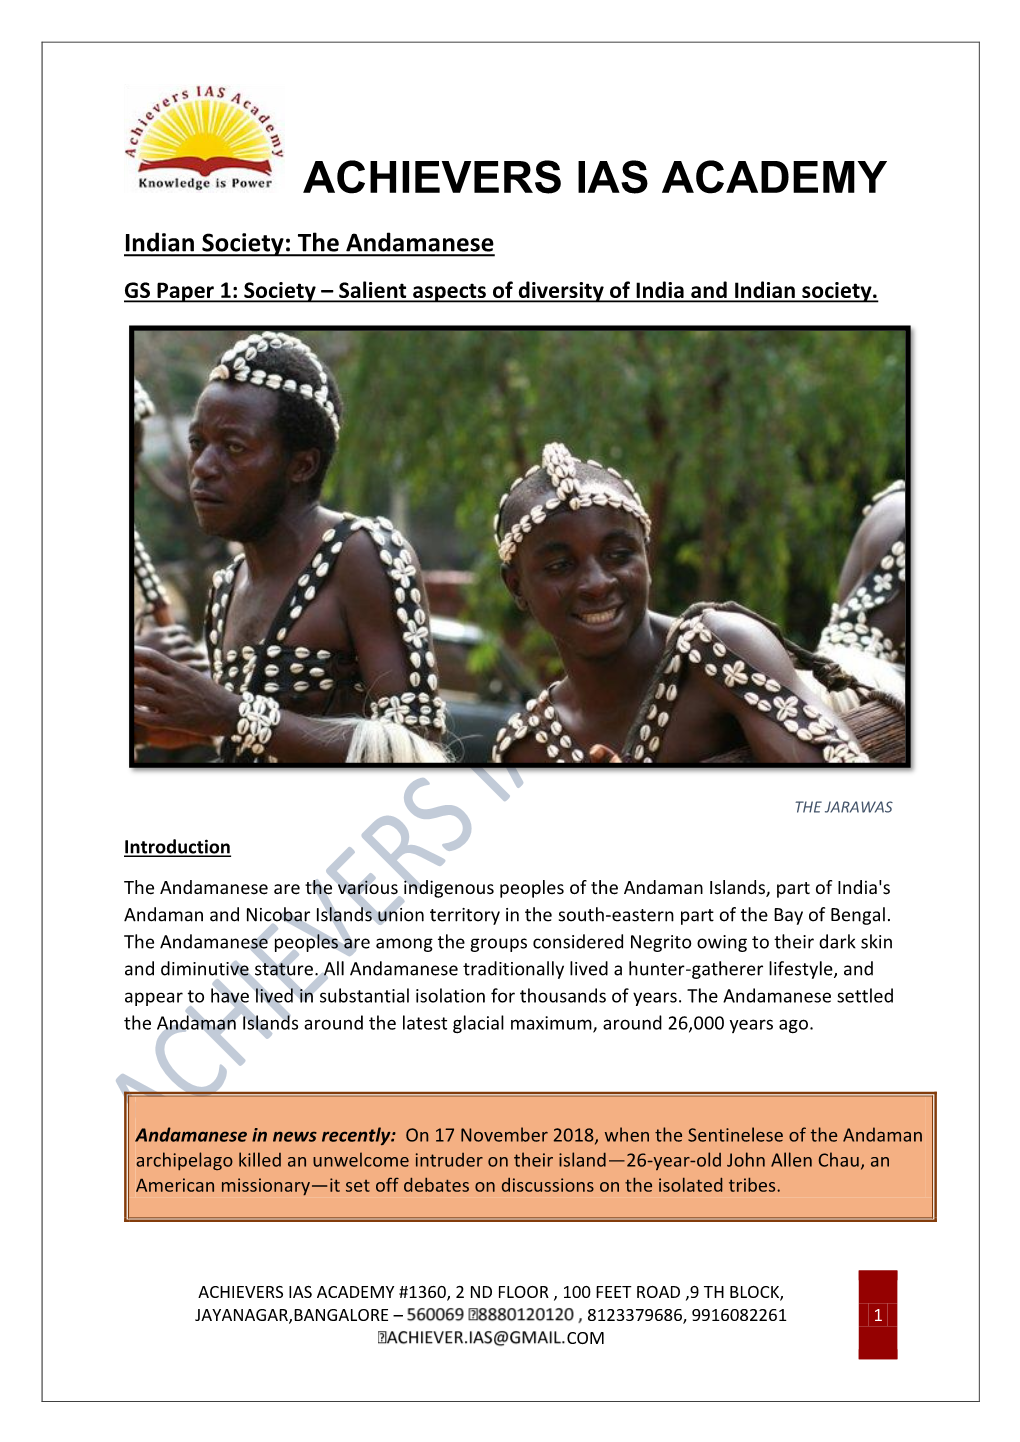 The Andamanese GS Paper 1: Society – Salient Aspects of Diversity of India and Indian Society